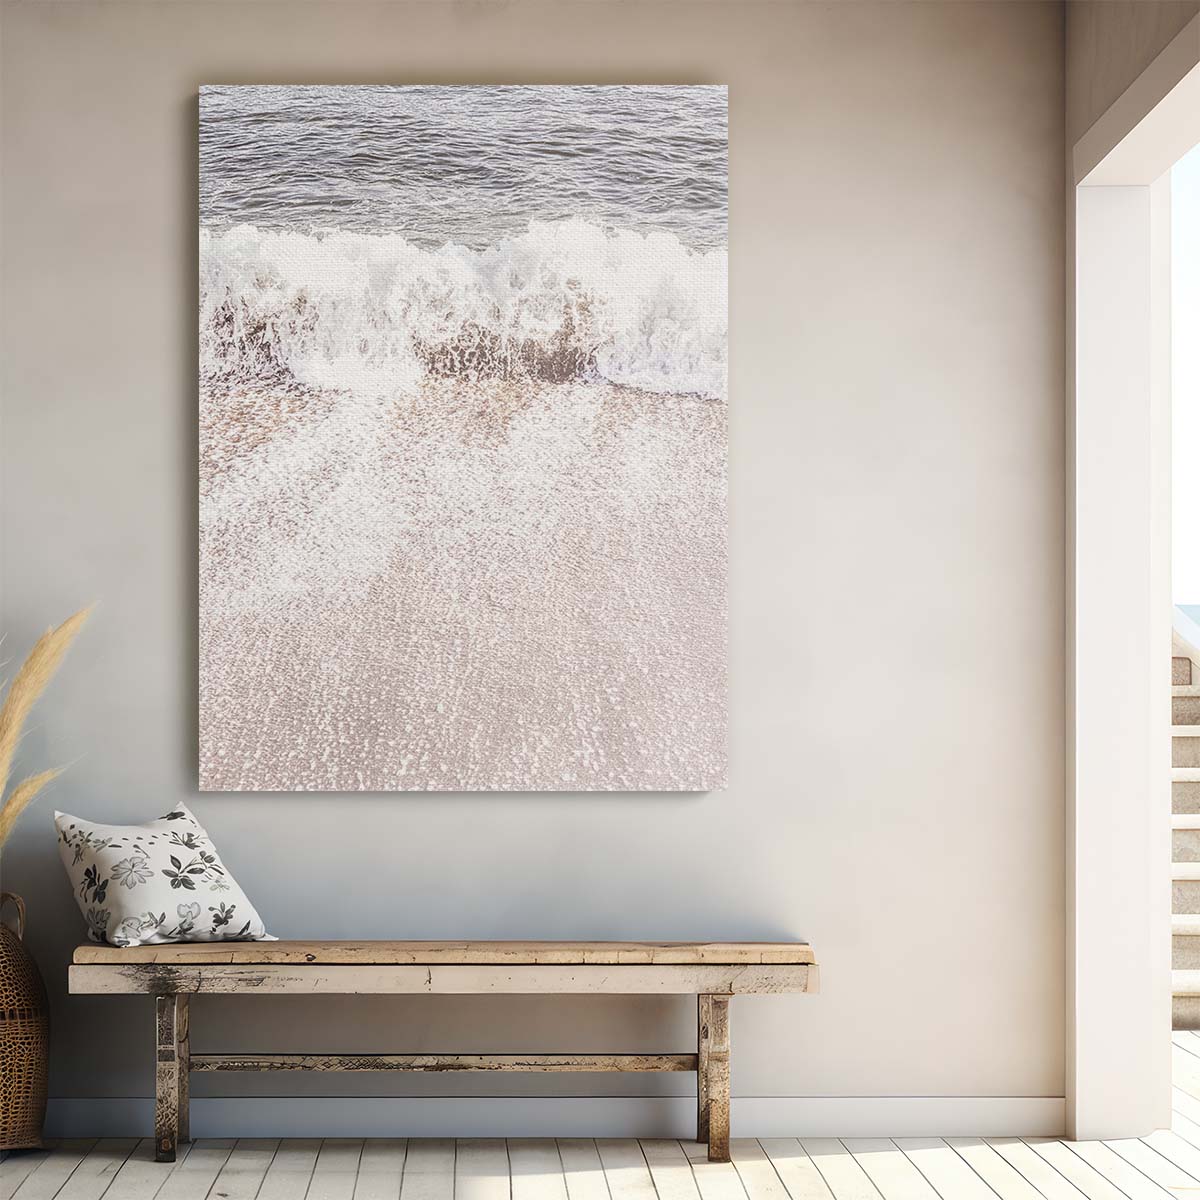 Abstract Beige Coastal Seascape Ocean Waves Photography Wall Art by Luxuriance Designs, made in USA